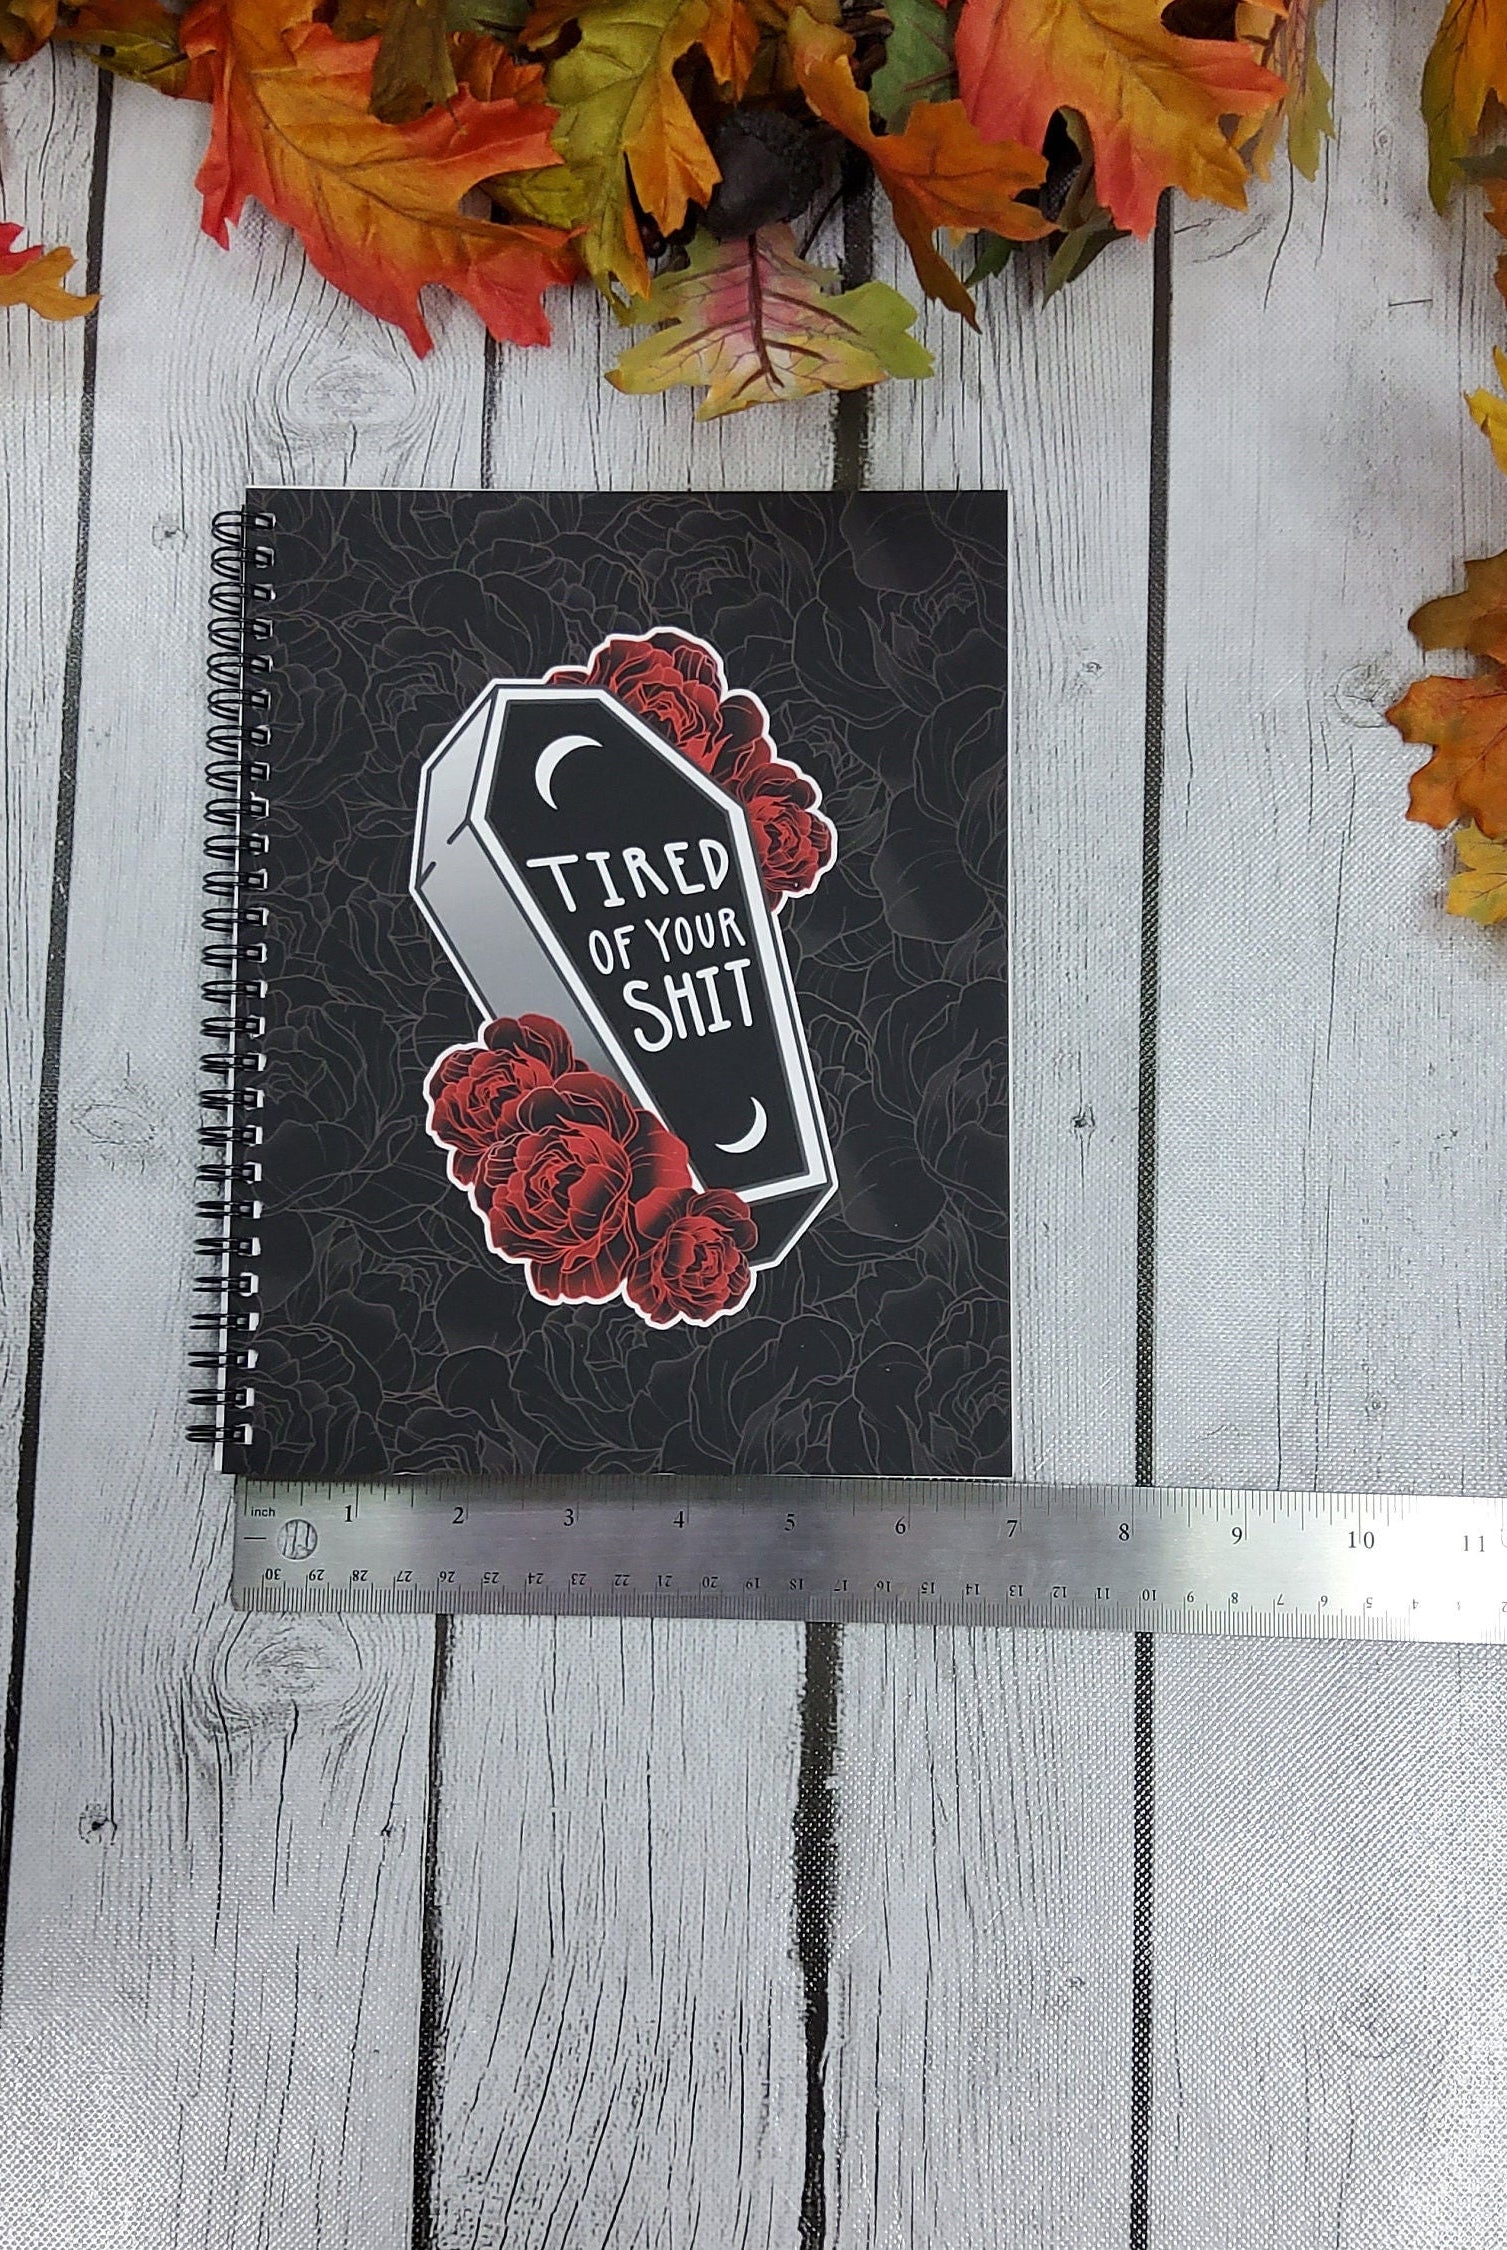 SPIRAL NOTEBOOK: Tired of Your Shit , Coffin and Roses Journal , Black Coffin and Roses Notebook , Dark Humor Spiral Journal